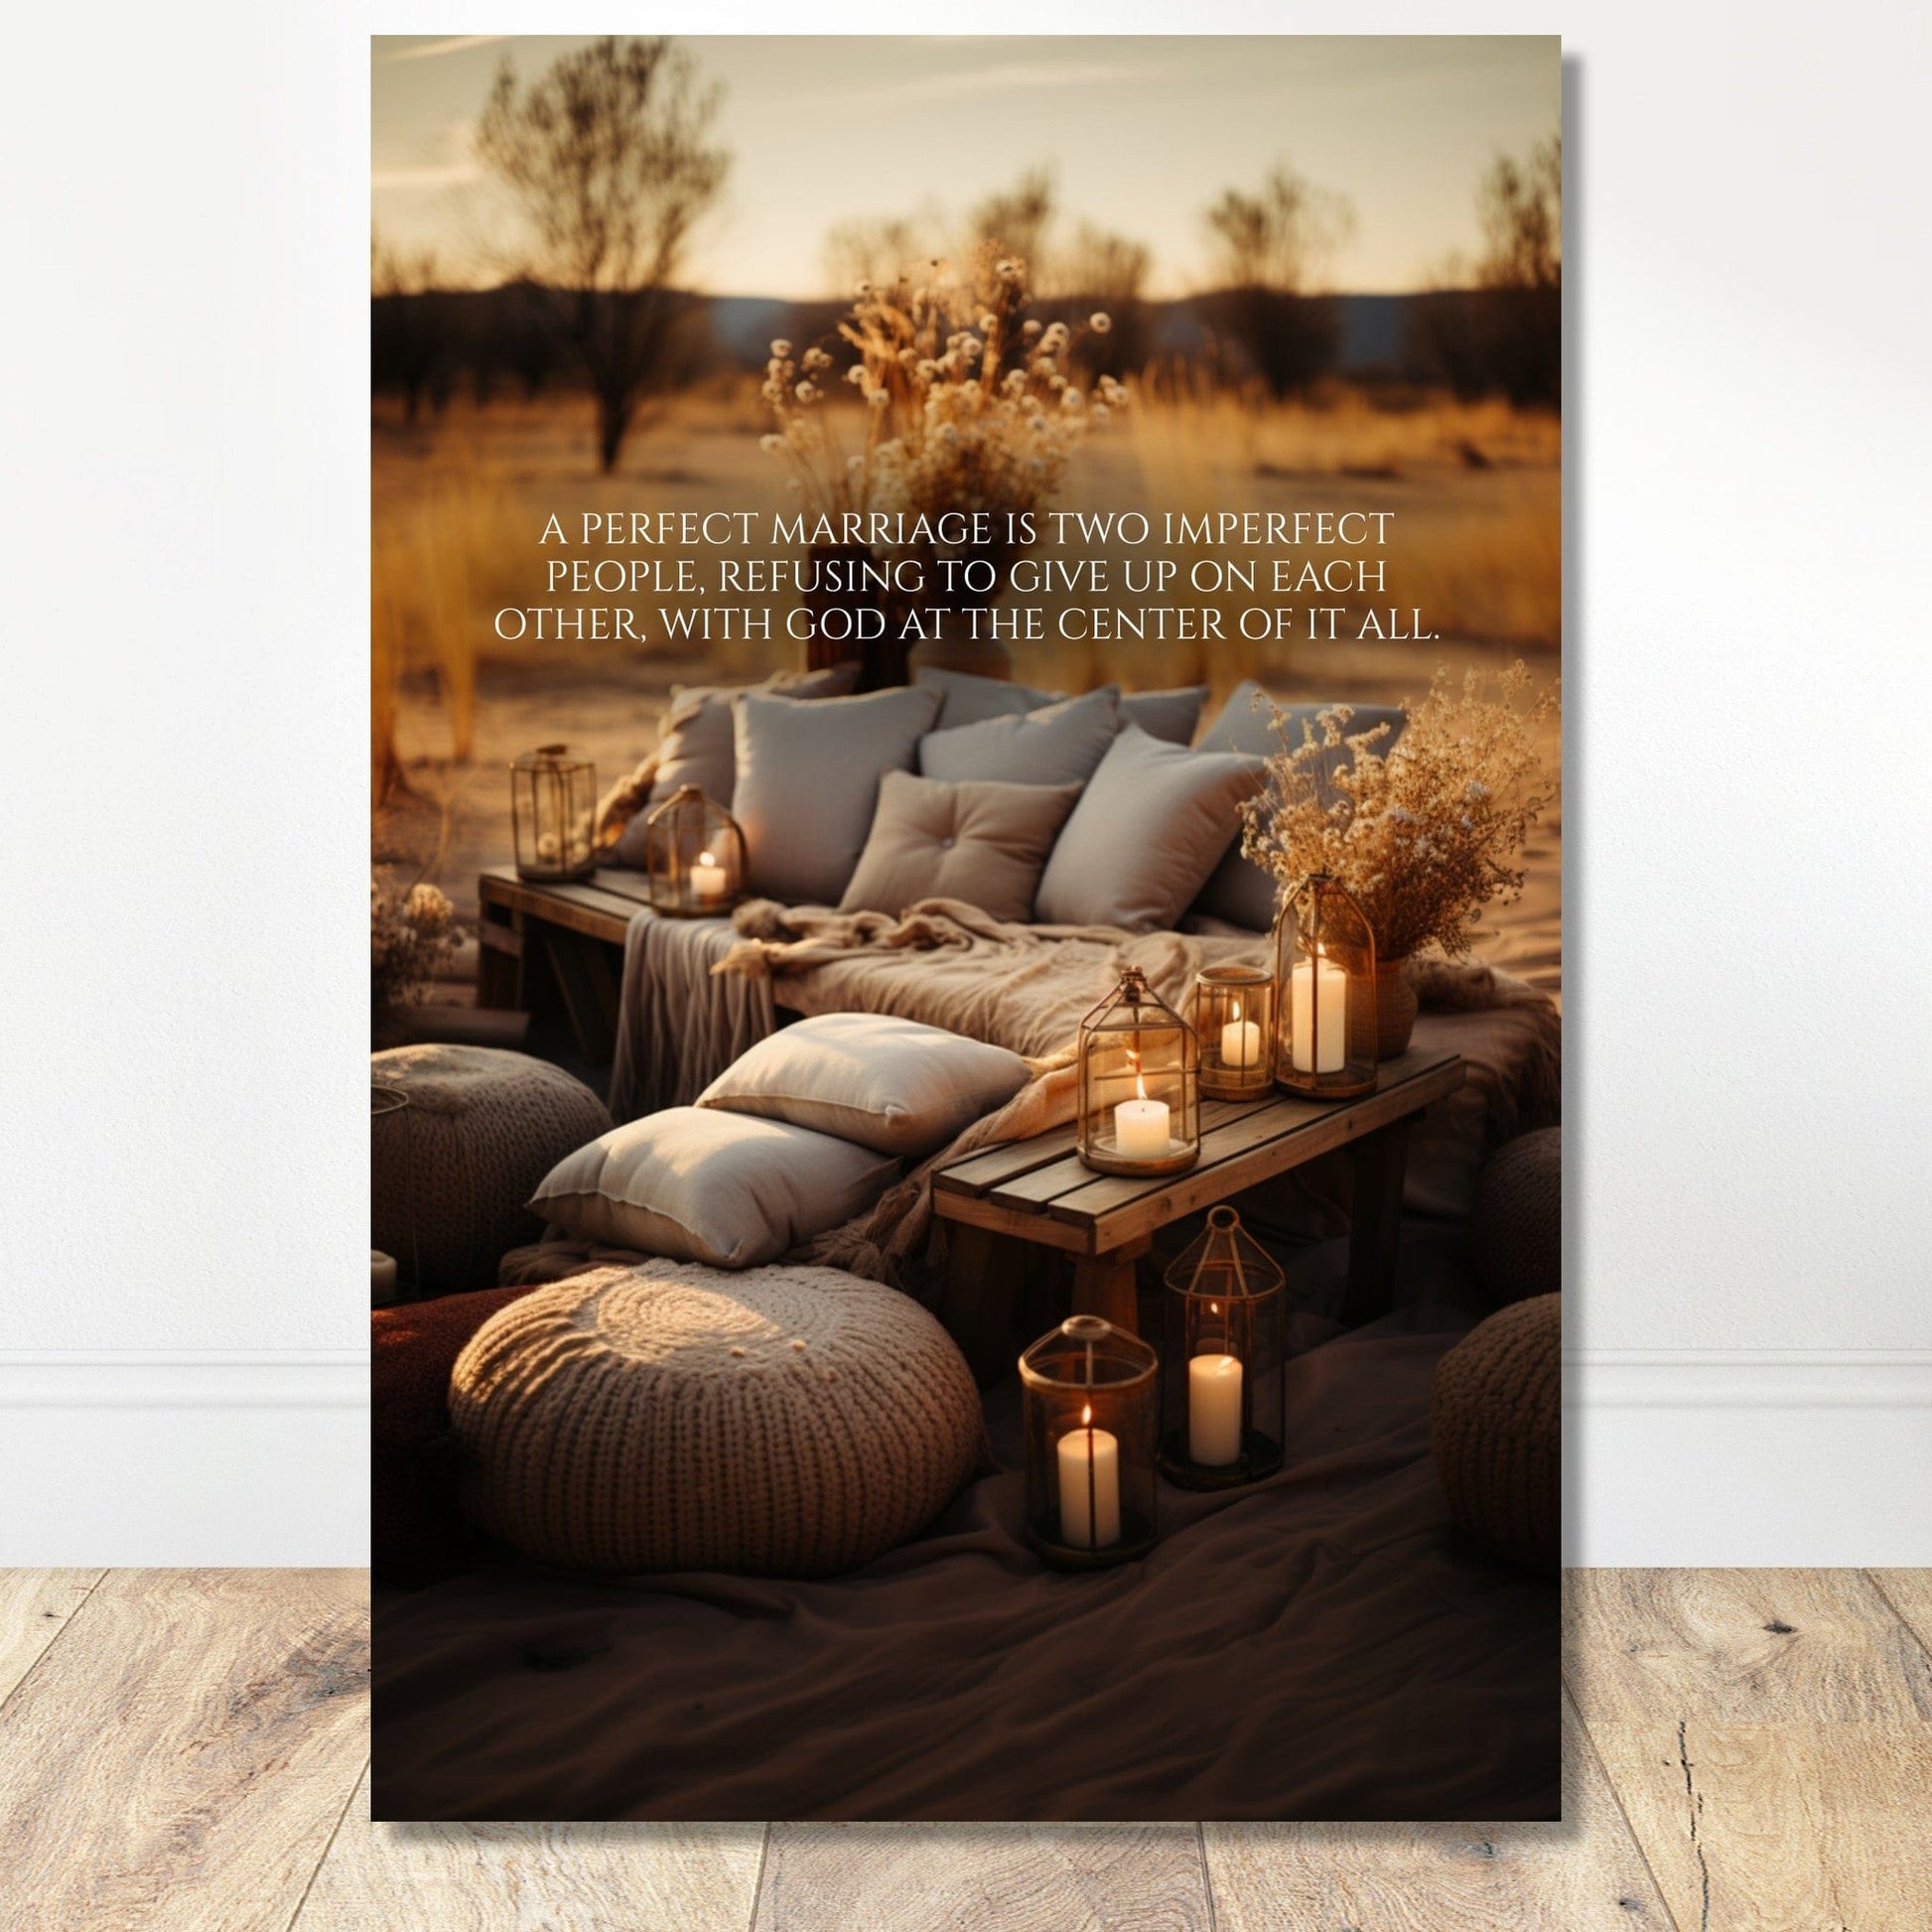 Coffee With My Father Print Material 60x90 cm / 24x36″ / Unframed / Unframed - Poster Only God-Centered Marriage - Custom Art